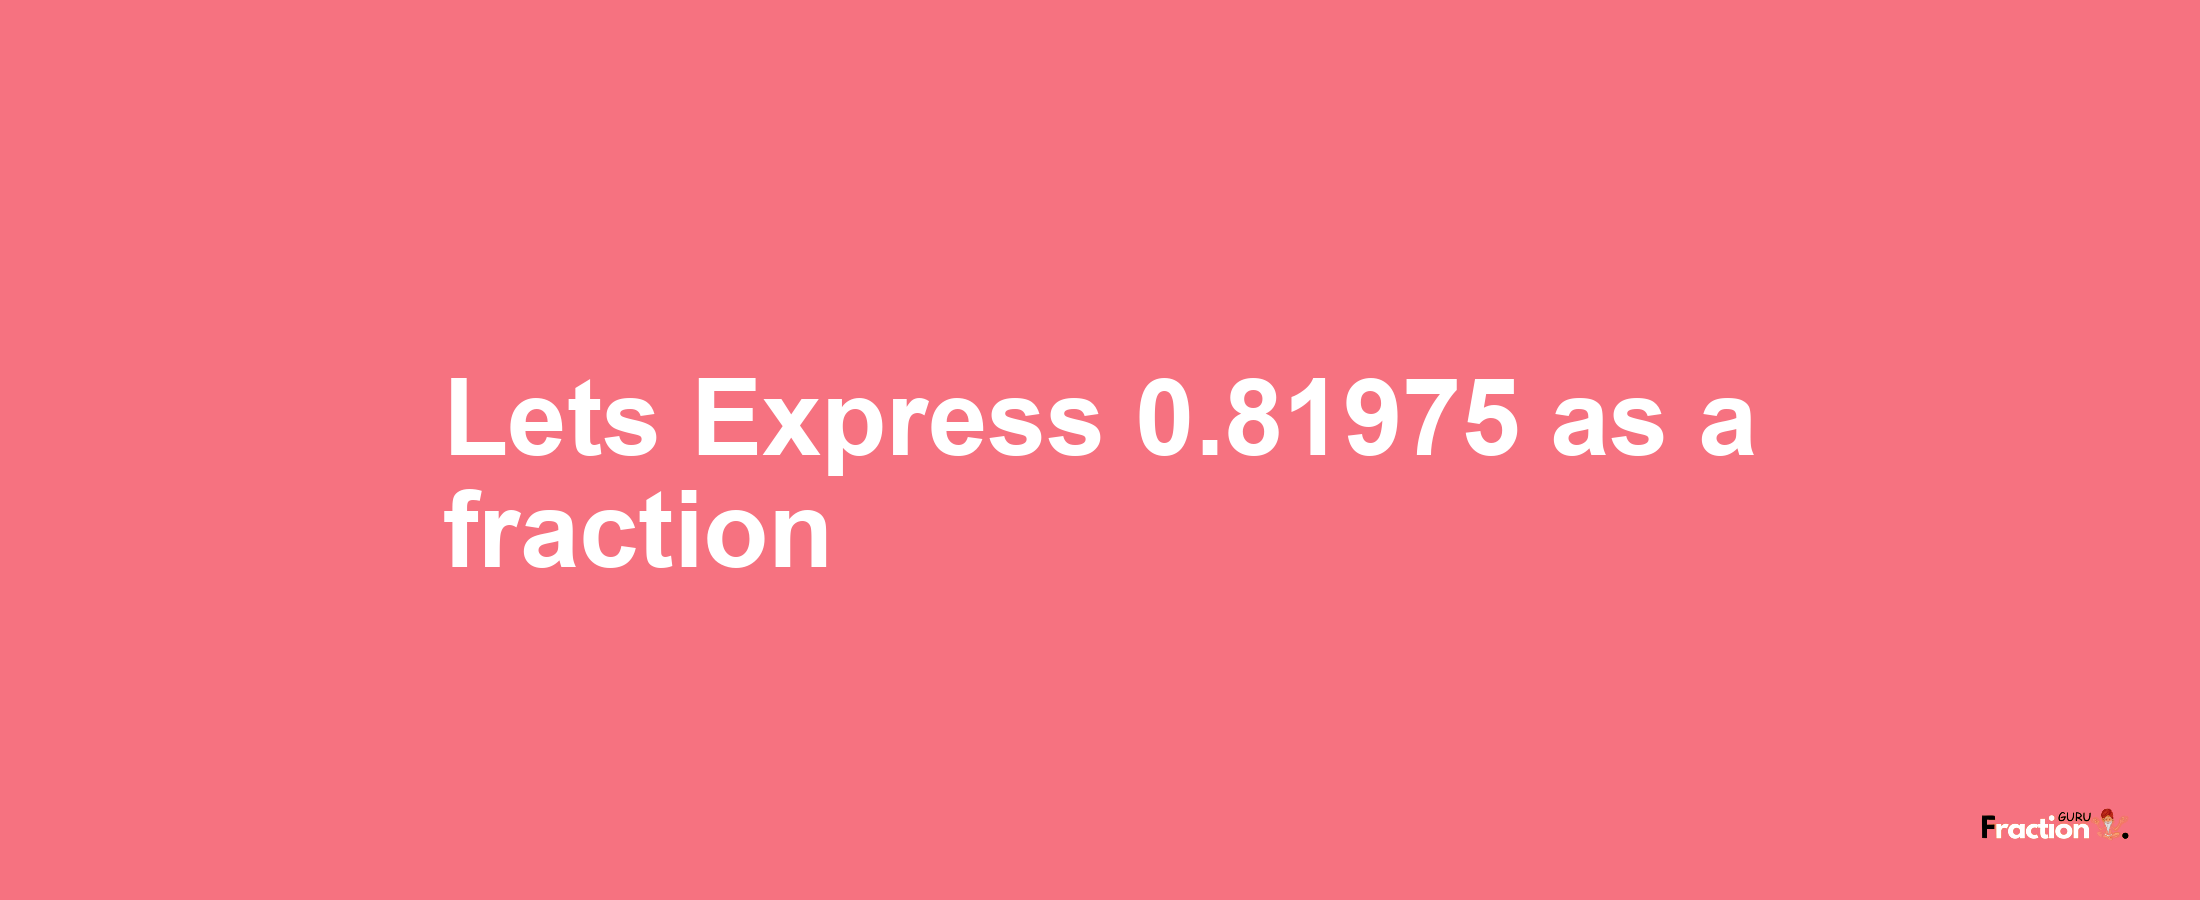 Lets Express 0.81975 as afraction